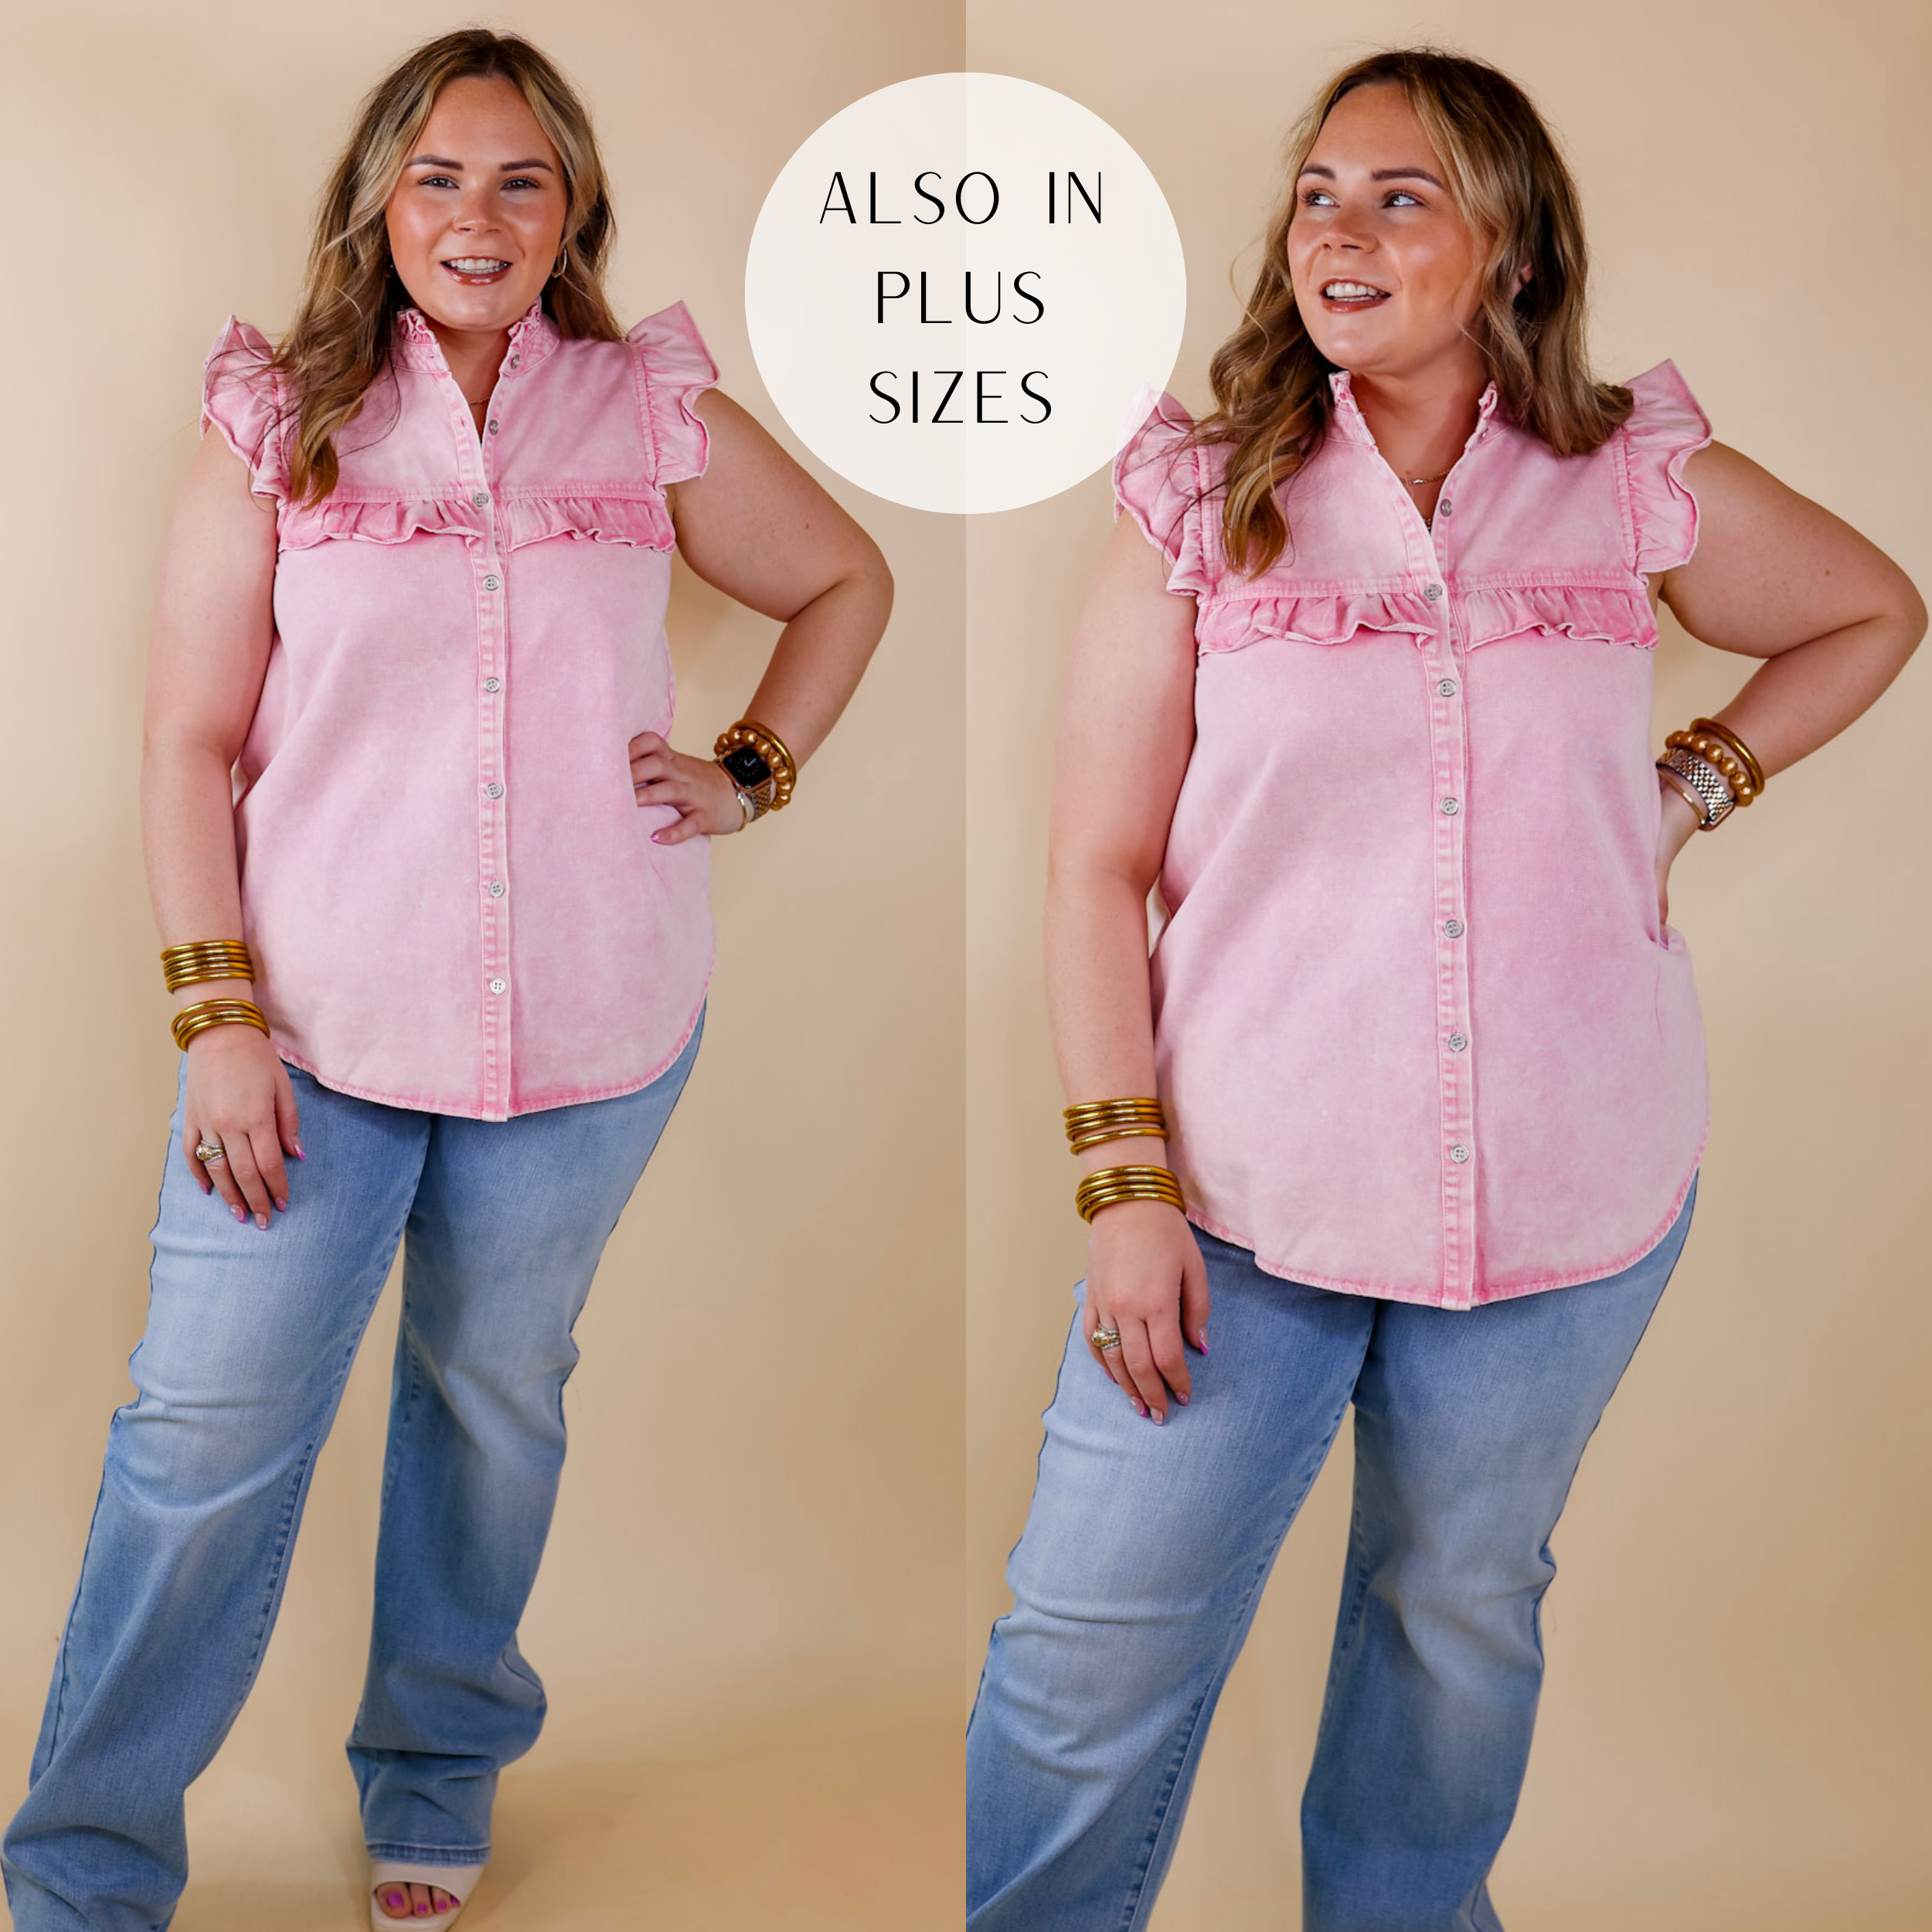 Model is wearing a pink denim button up top with ruffle cap sleeves. Model has it paired with wide leg jeans, white heels, and gold jewelry.